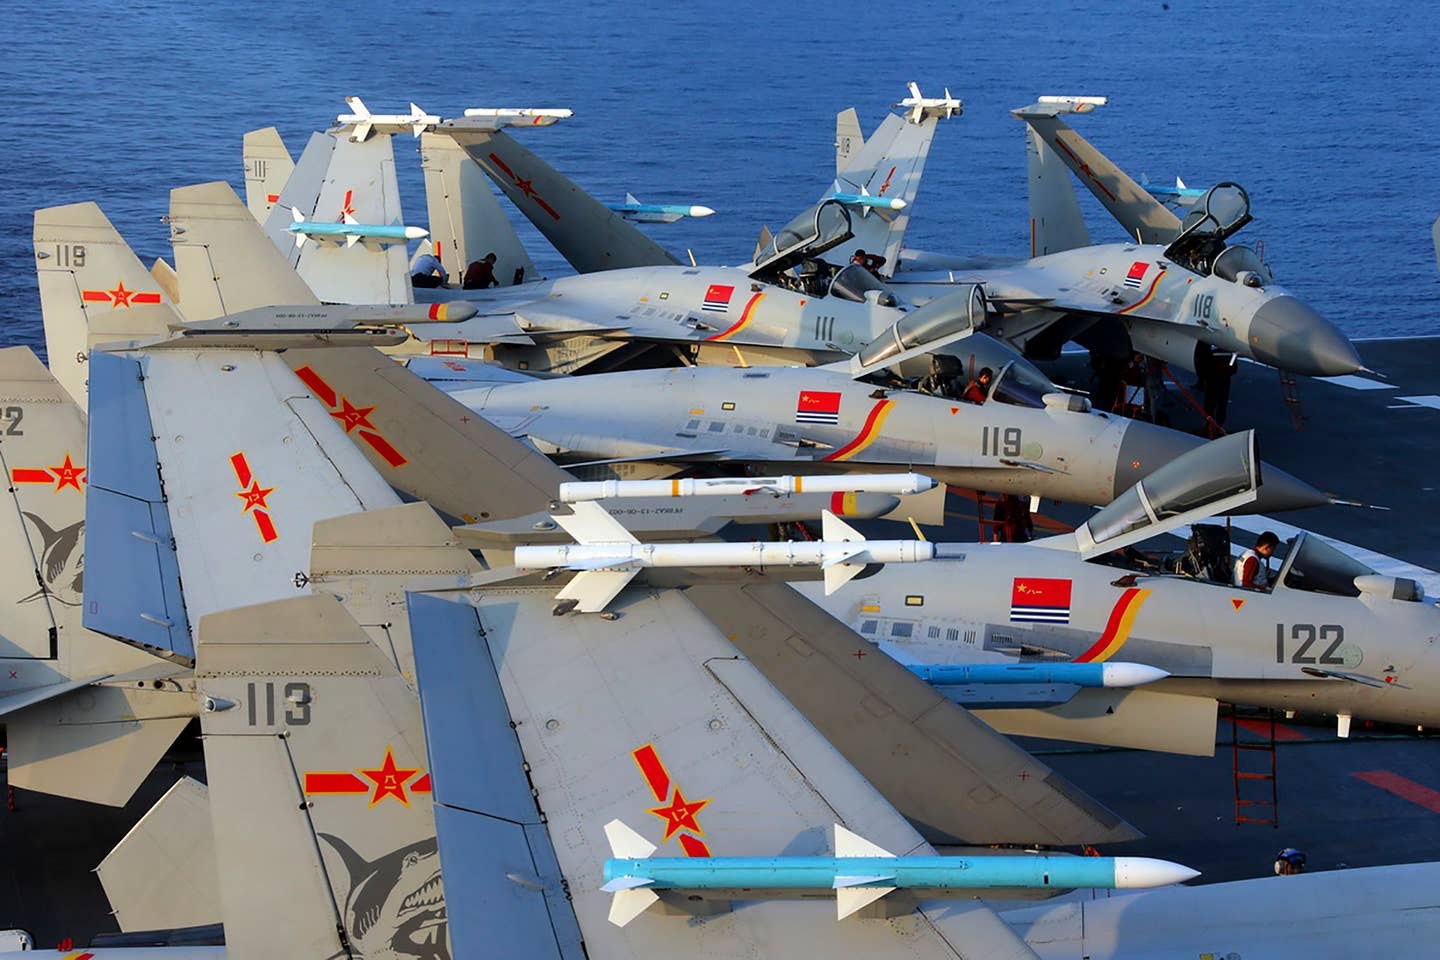 J-15 carrier fighters on the deck of the aircraft carrier <em>Liaoning</em>. The blue-colored missiles are inert PL-12s, with a mixture of PL-8s and air combat maneuvering instrumentation pods on the wingtip stations. <em>AFP via Getty Images</em>